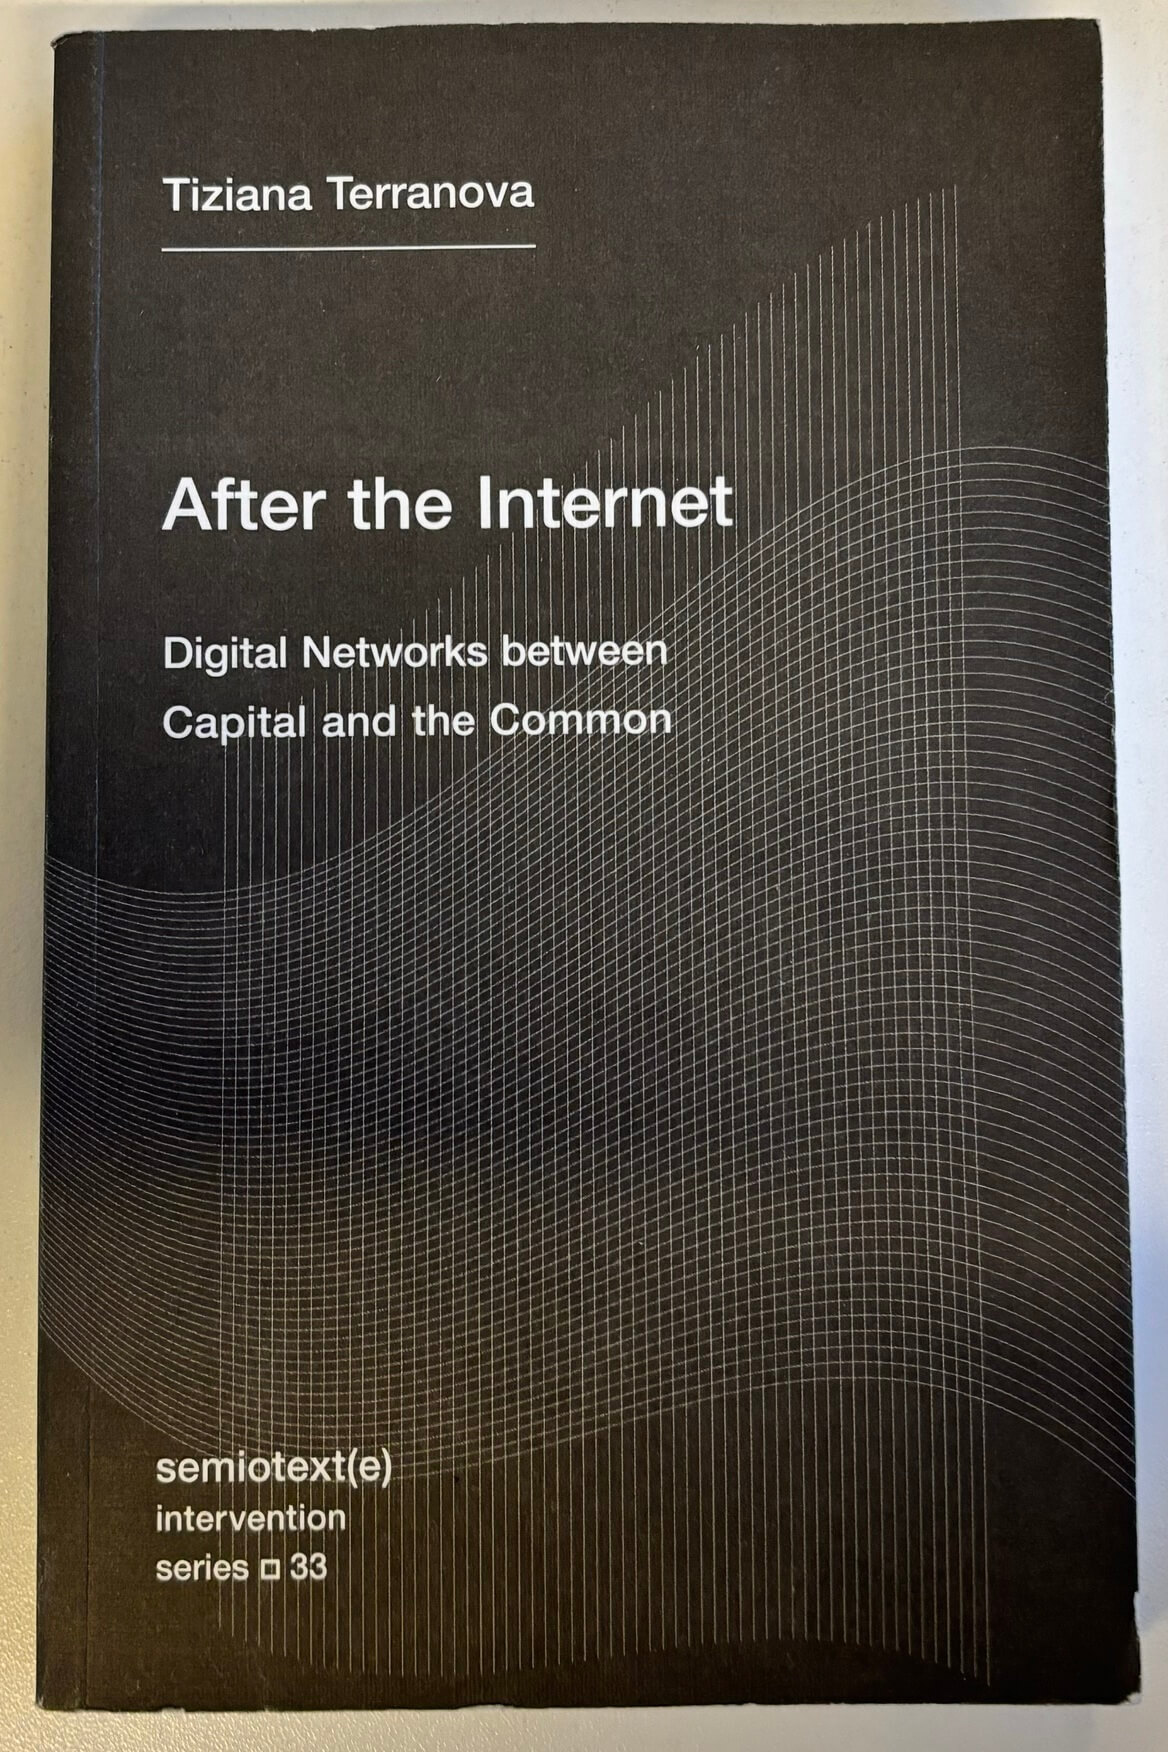 “After the Internet: Digital Networks between Capital and the Common” by Tiziana Terranova